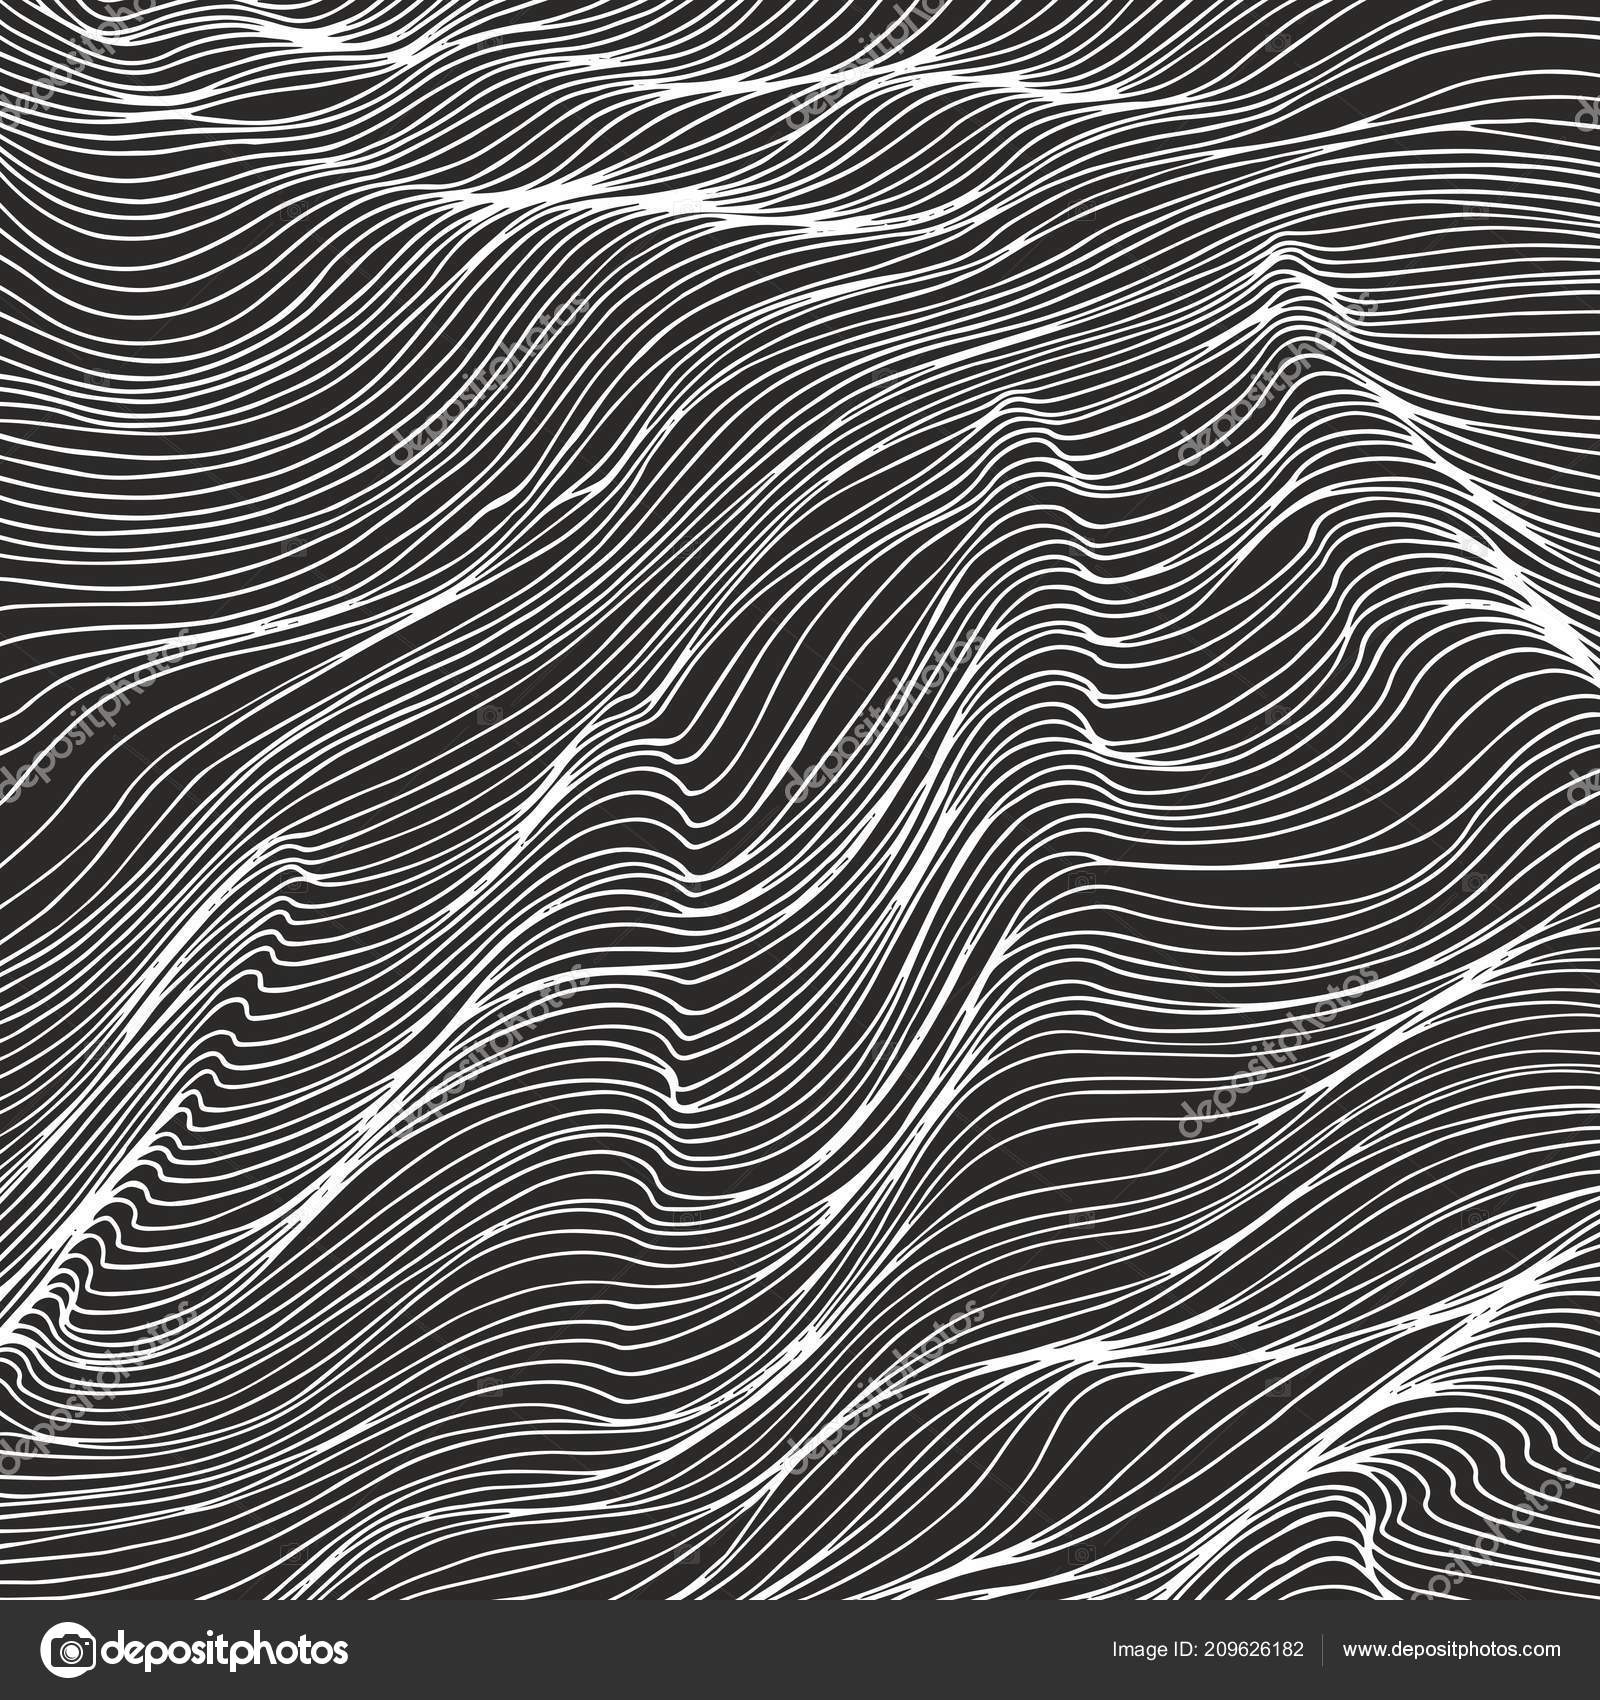 Black And White Waves Drawing Black White Abstract Background Waves Hand Drawing Stock Vector C Elonalaff